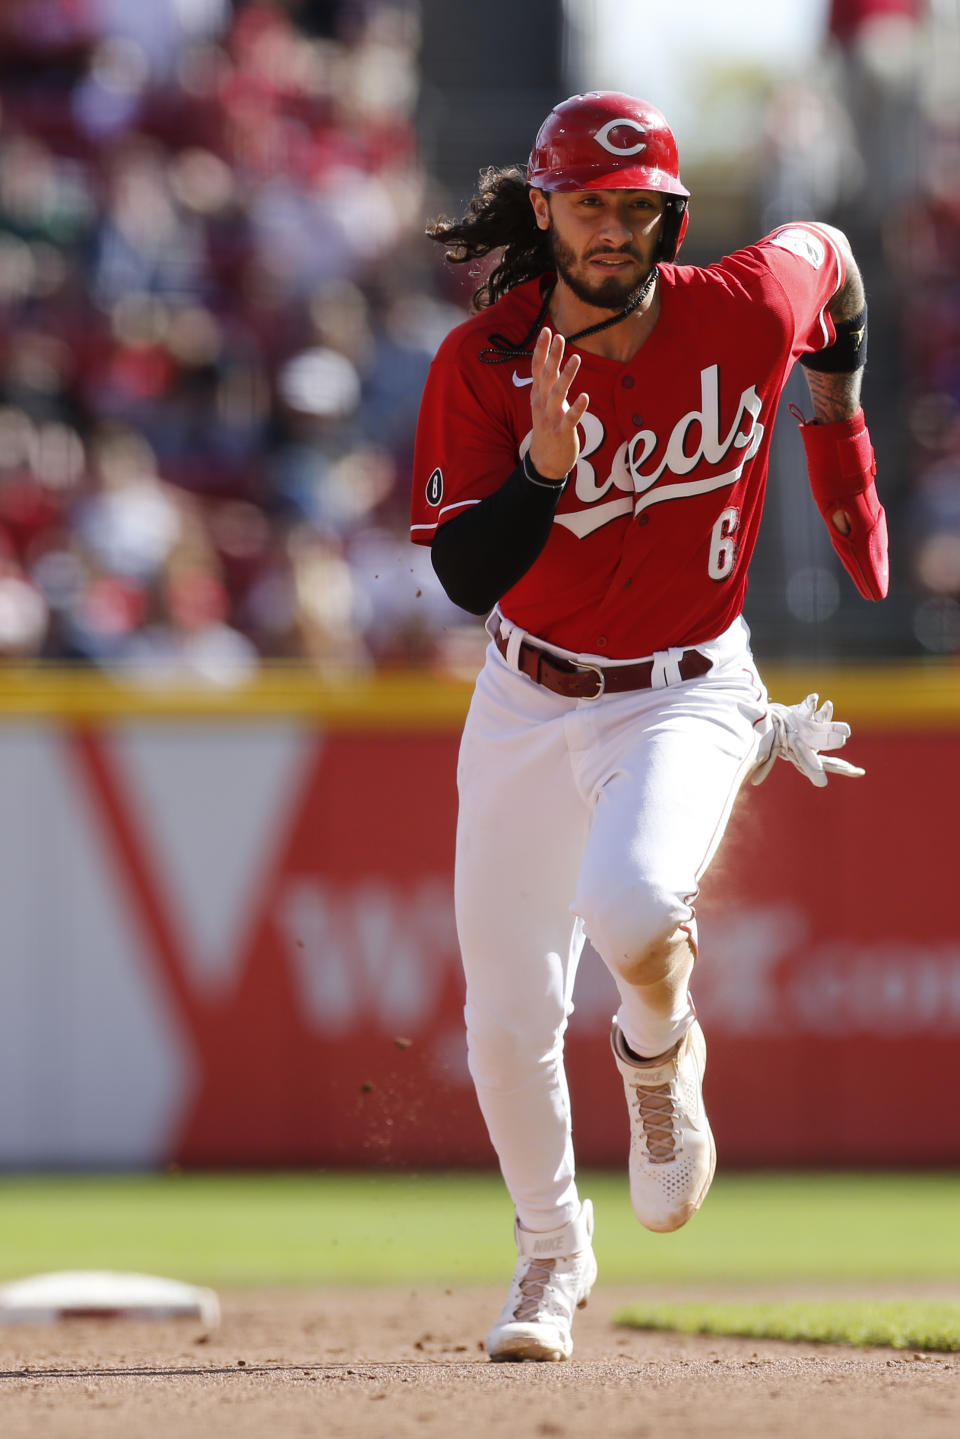 Cincinnati Reds' Jonathan India advances to third on a fly ball sacrifice against the Washington Nationals during the seventh inning of a baseball game Sunday, Sept. 26, 2021, in Cincinnati. The Reds defeated the Nationals 9-2. (AP Photo/Jay LaPrete)